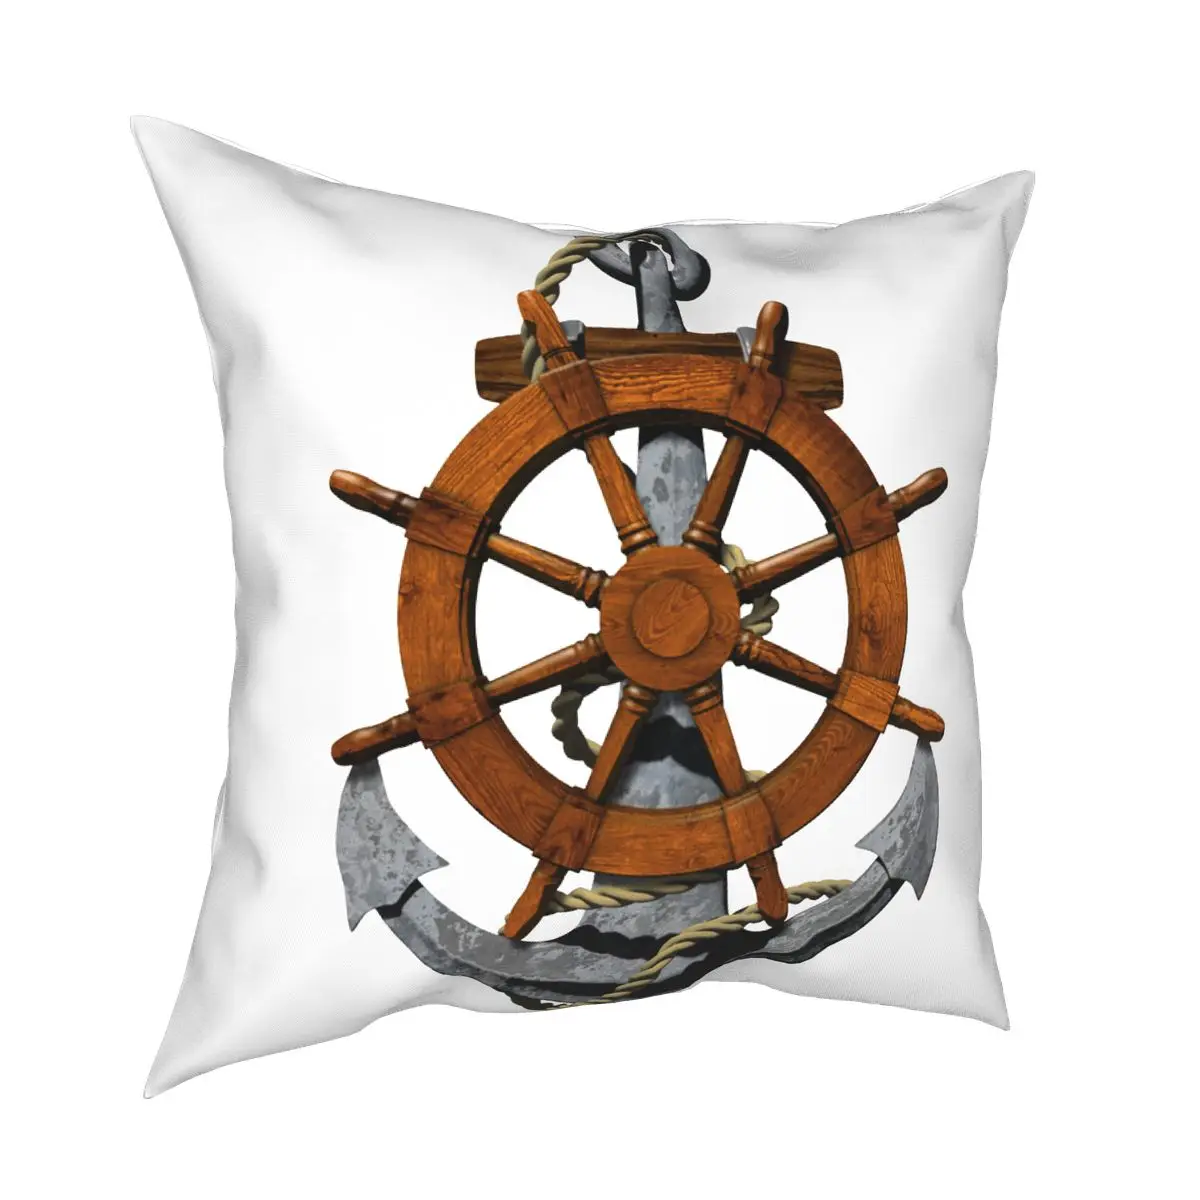 

Nautical Ships Wheel And Anchor Sailing Pillowcover Decoration Sea Boat Ship Captain Cushion Cover Throw Pillow for Home